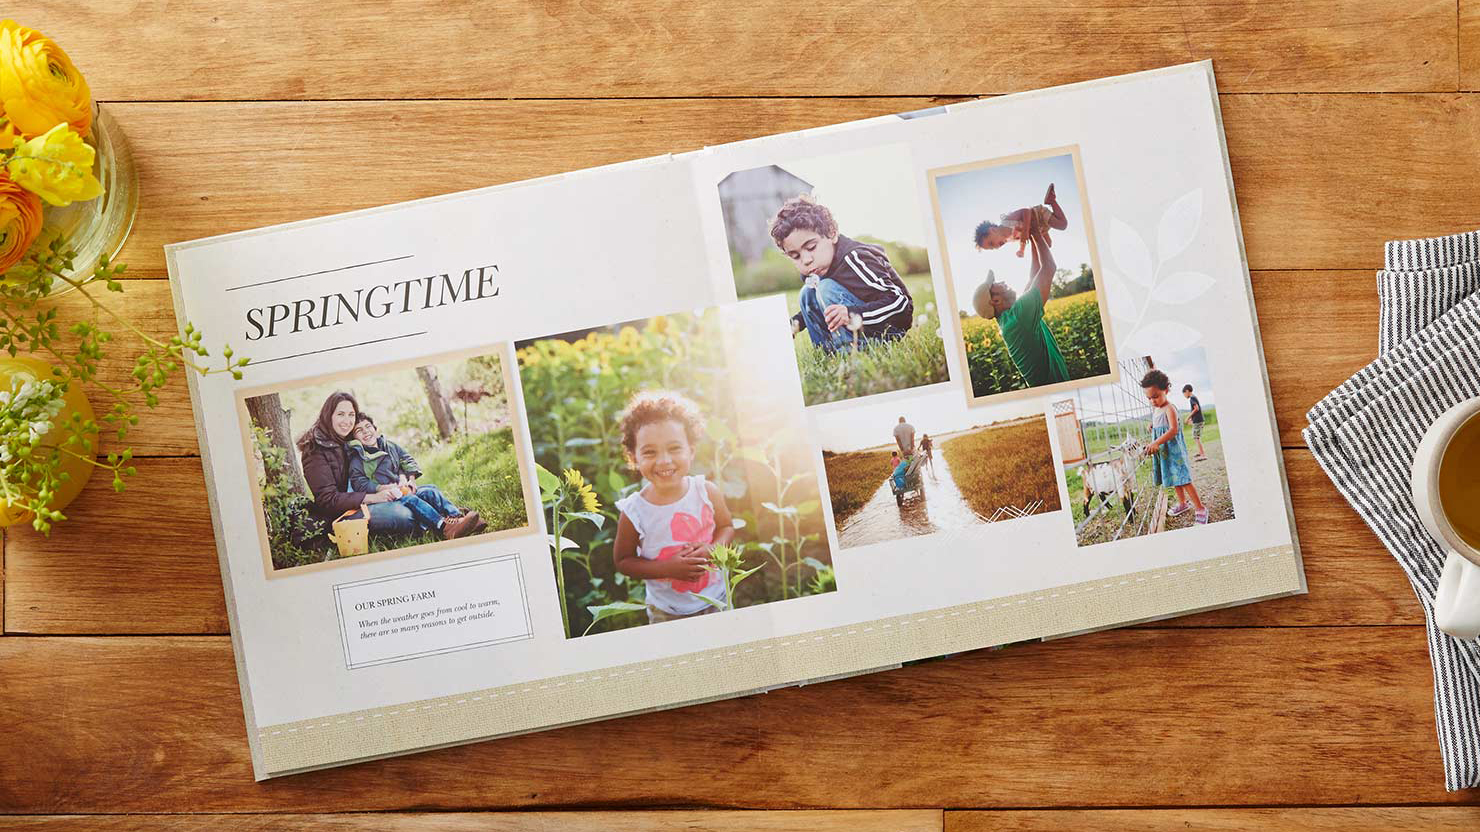 A photobook from Shutterfly